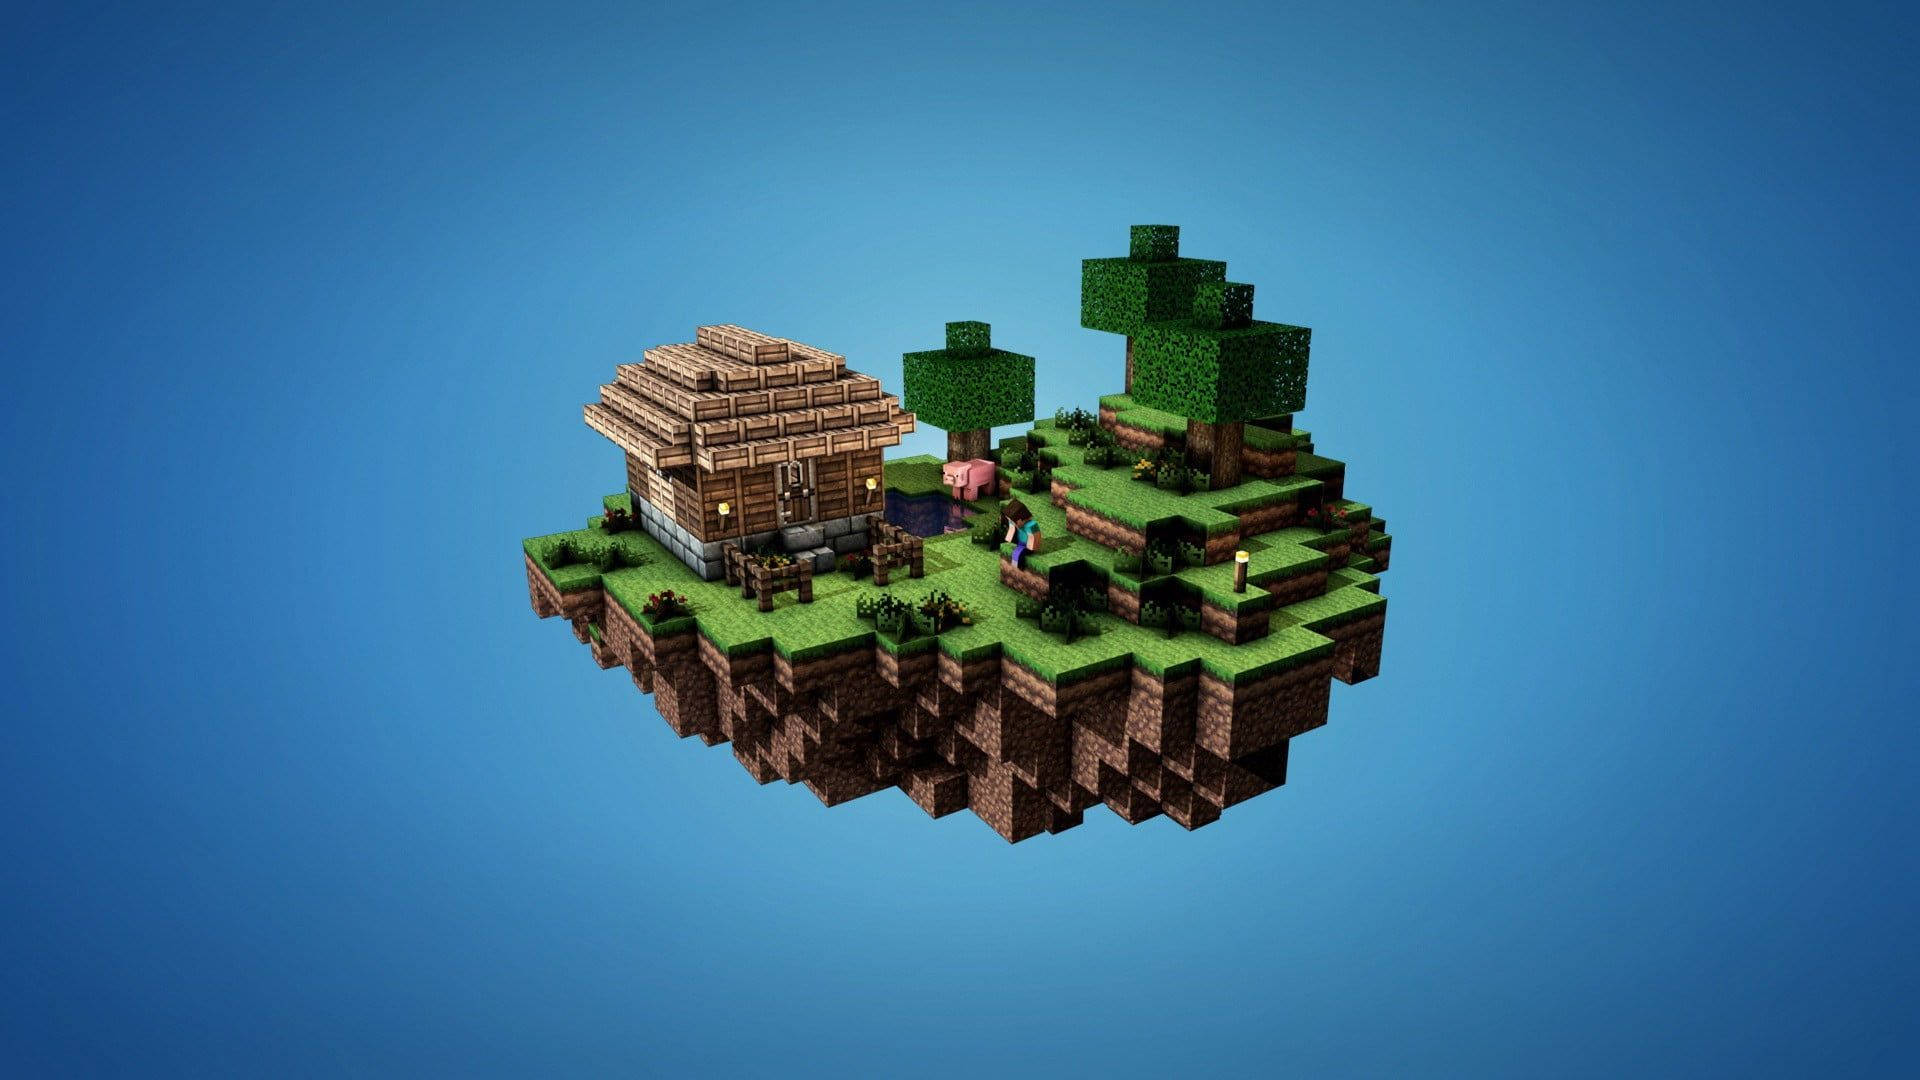 Minecraft Floating Island With House wallpaper